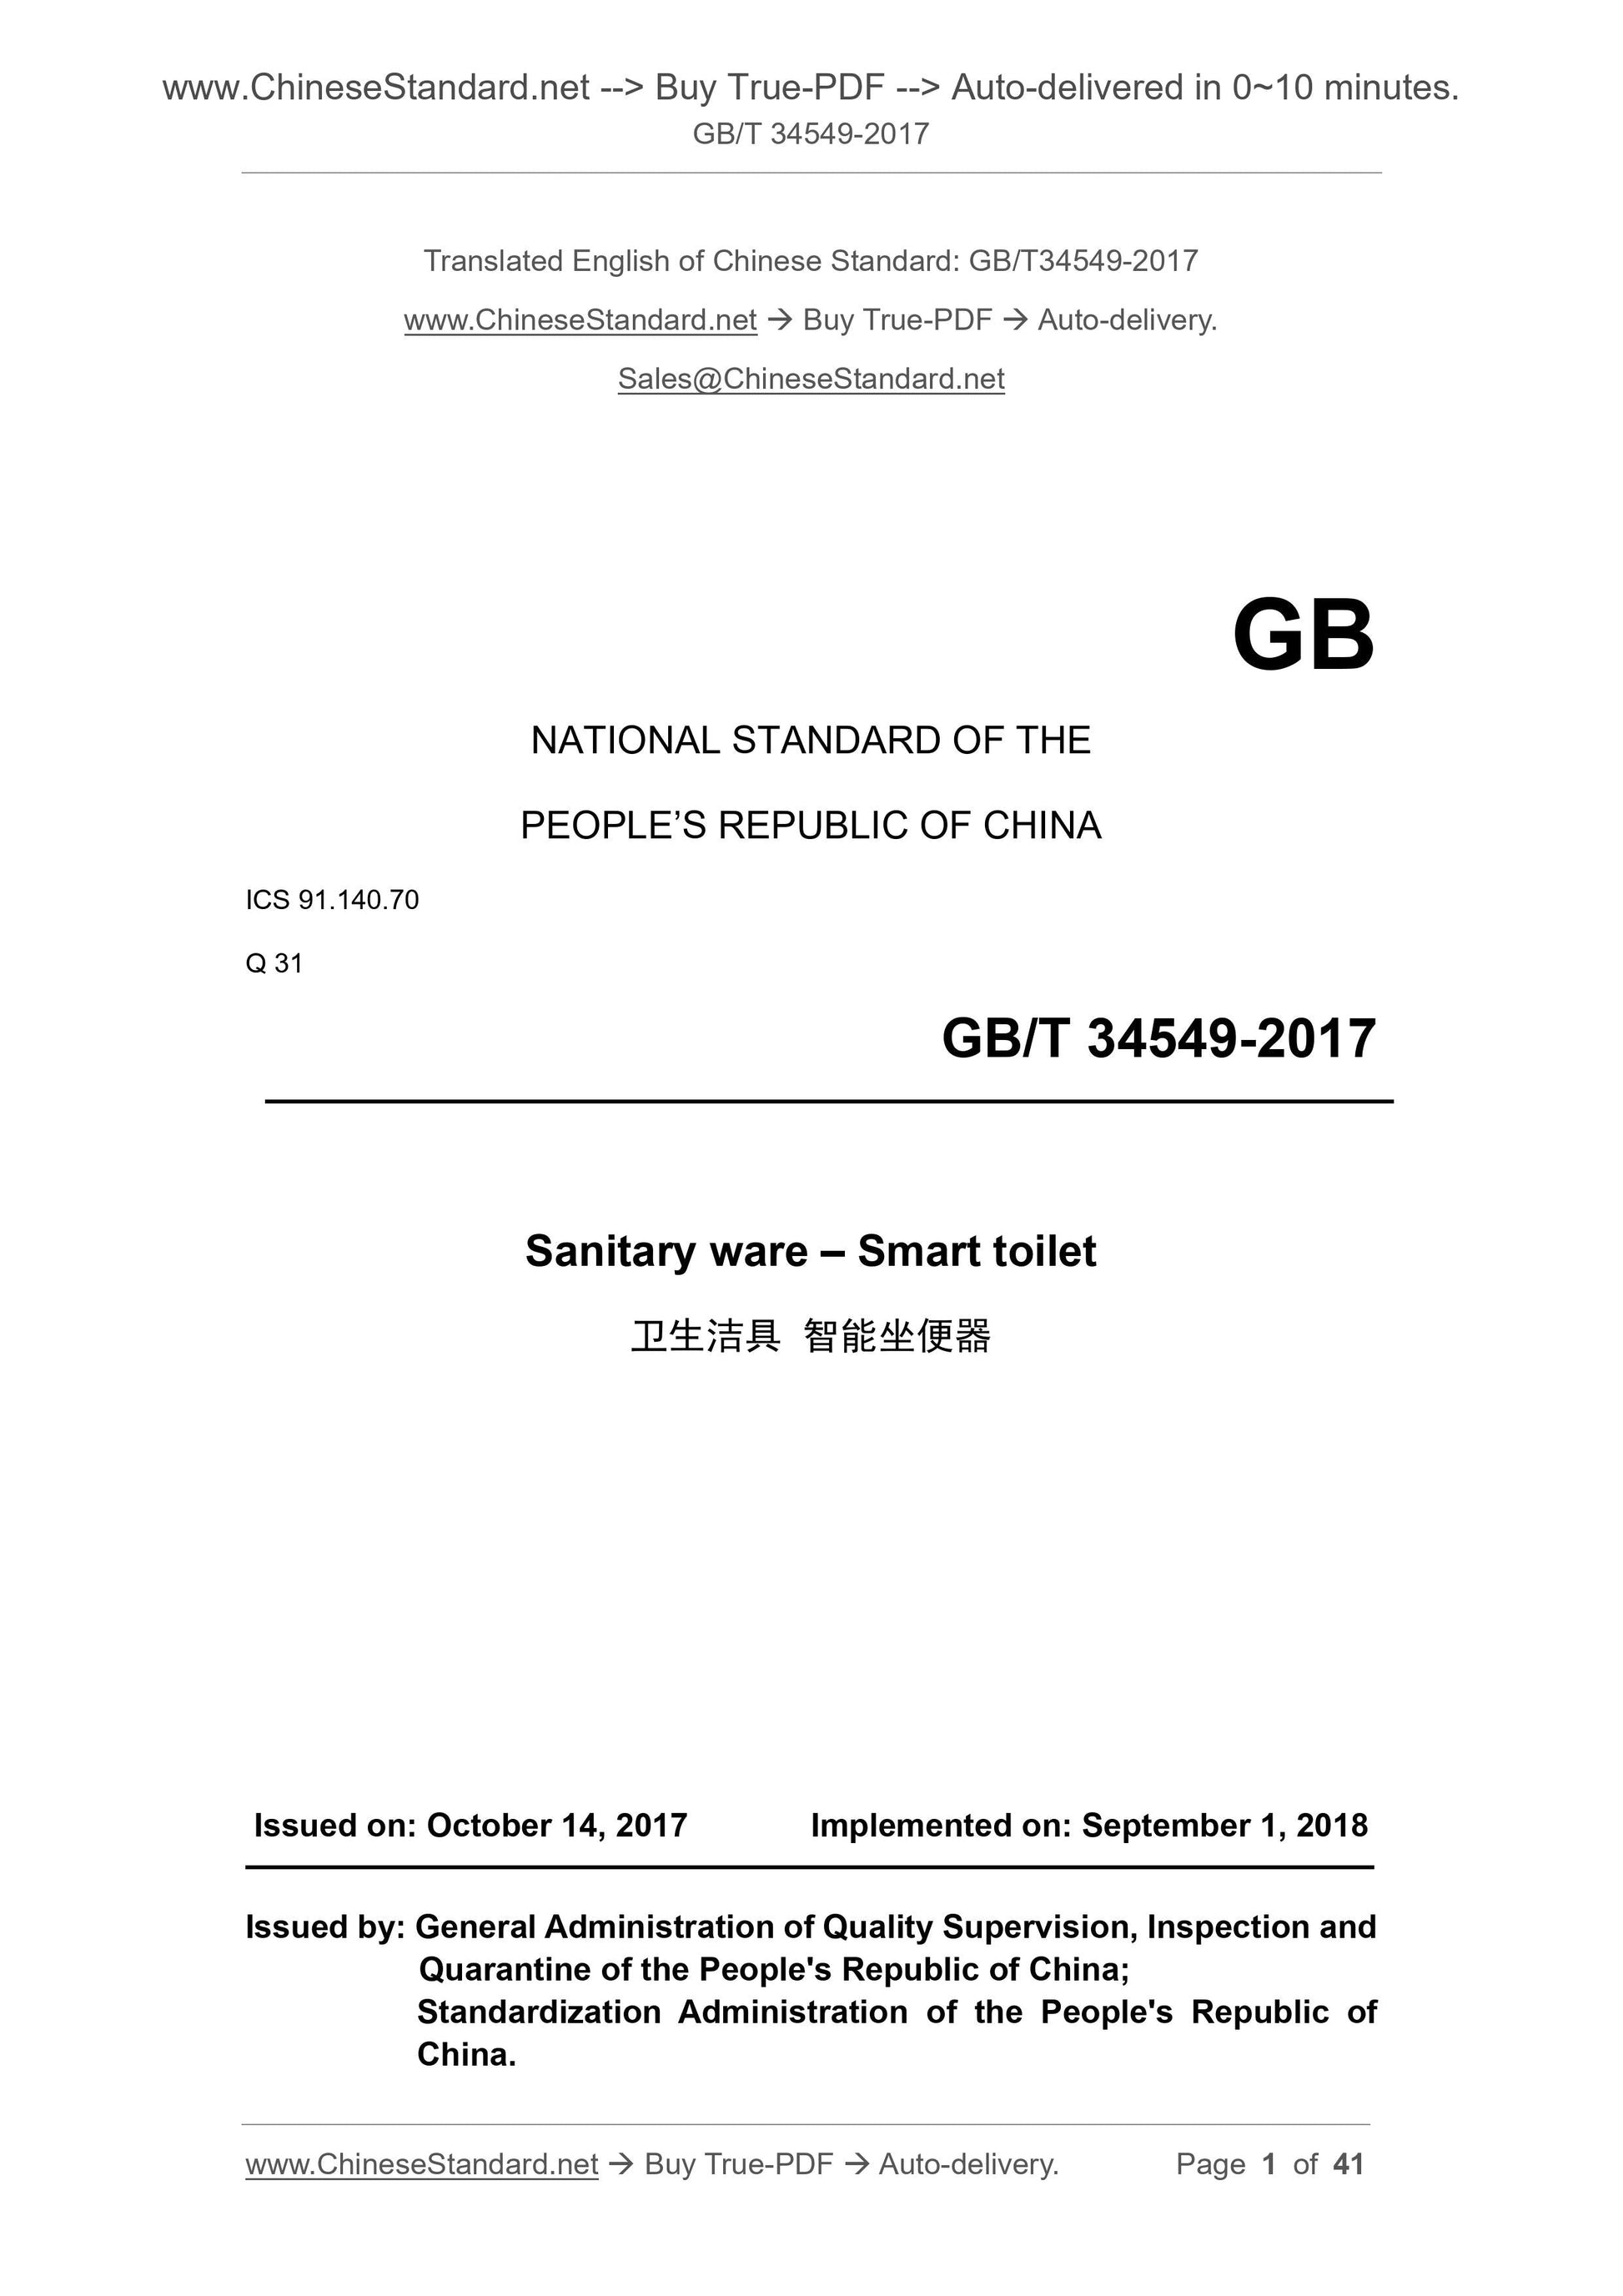 GB/T 34549-2017 Page 1